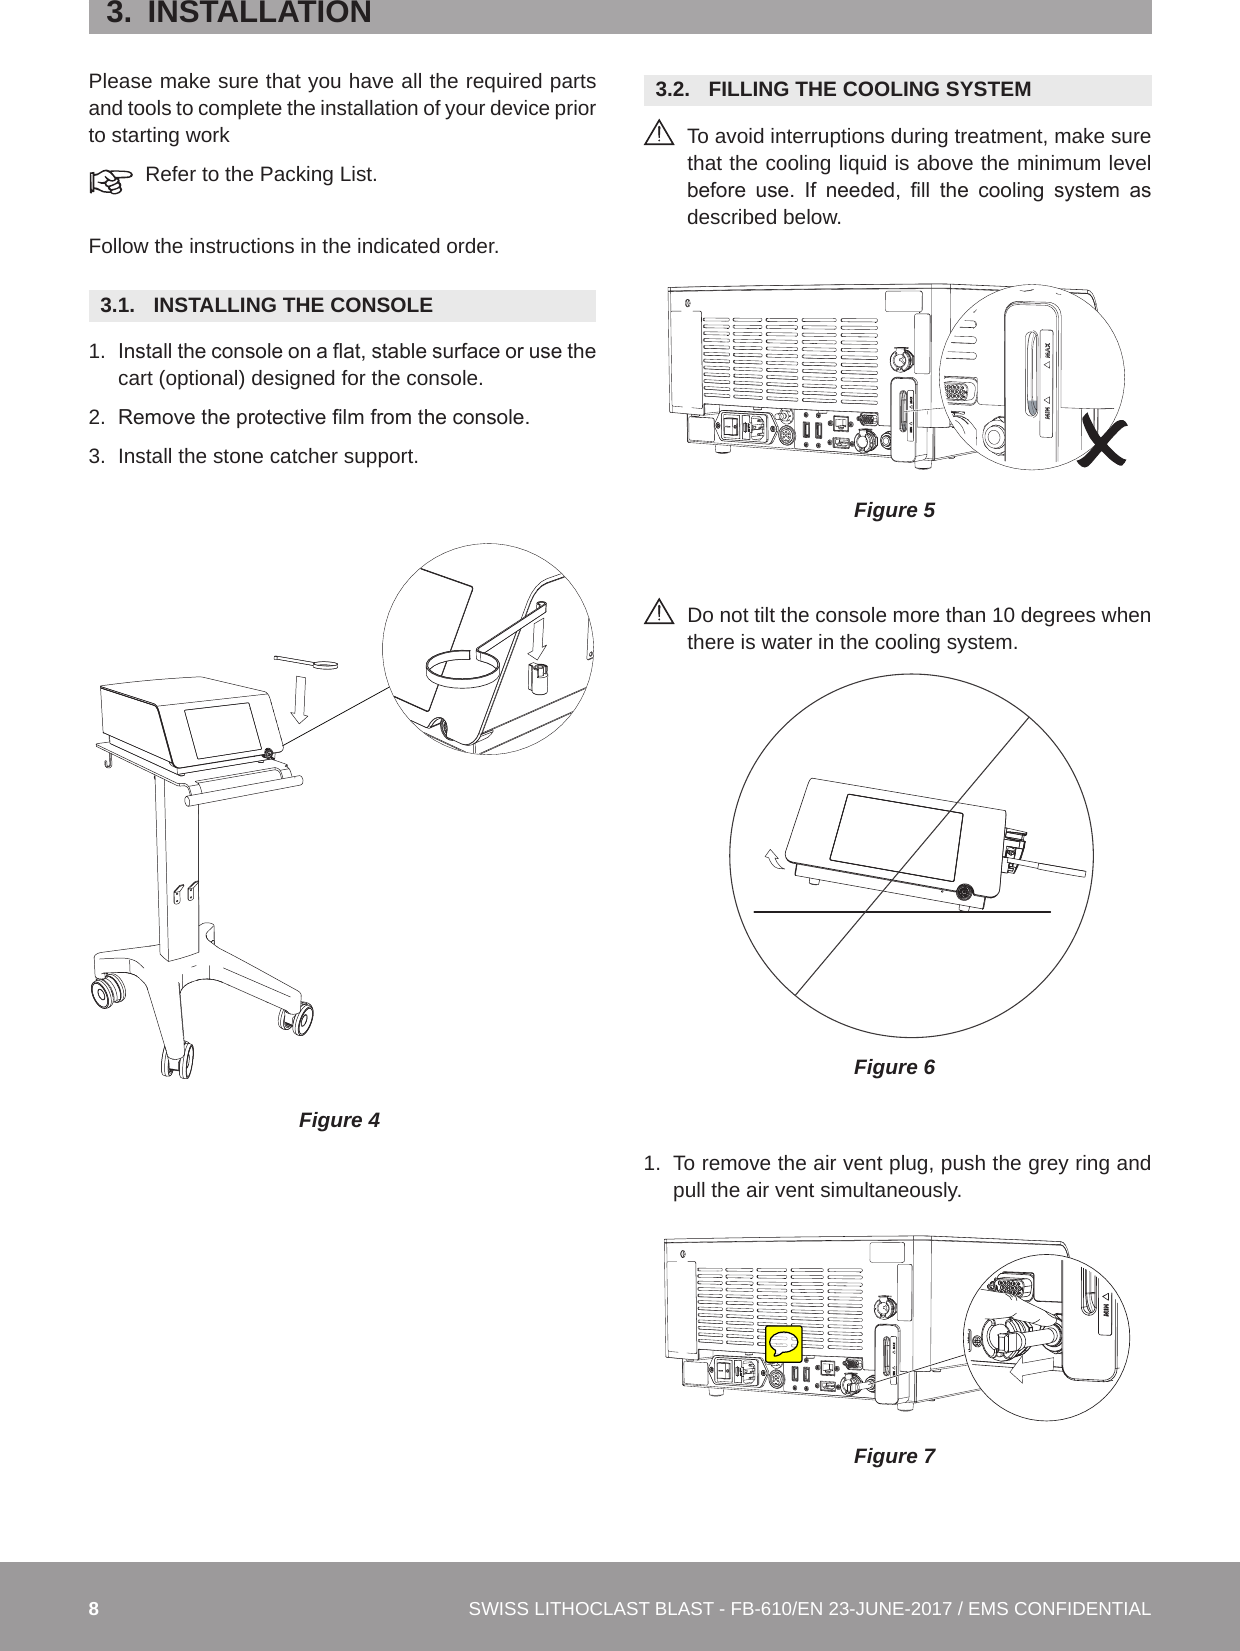 8SWISS LITHOCLAST BLAST - FB-610/EN 23-JUNE-2017 / EMS CONFIDENTIAL3.  INSTALLATIONPlease make sure that you have all the required parts and tools to complete the installation of your device prior to starting workRefer to the Packing List.Follow the instructions in the indicated order.3.1.  INSTALLING THE CONSOLE 1.  Install the console on a at, stable surface or use the cart (optional) designed for the console. 2.  Remove the protective lm from the console. 3.  Install the stone catcher support. Figure 43.2.  FILLING THE COOLING SYSTEM  To avoid interruptions during treatment, make sure that the cooling liquid is above the minimum level before  use.  If  needed,  ll  the  cooling  system  as described below.Figure 5Do not tilt the console more than 10 degrees when there is water in the cooling system.Figure 61.  To remove the air vent plug, push the grey ring and pull the air vent simultaneously.Figure 7